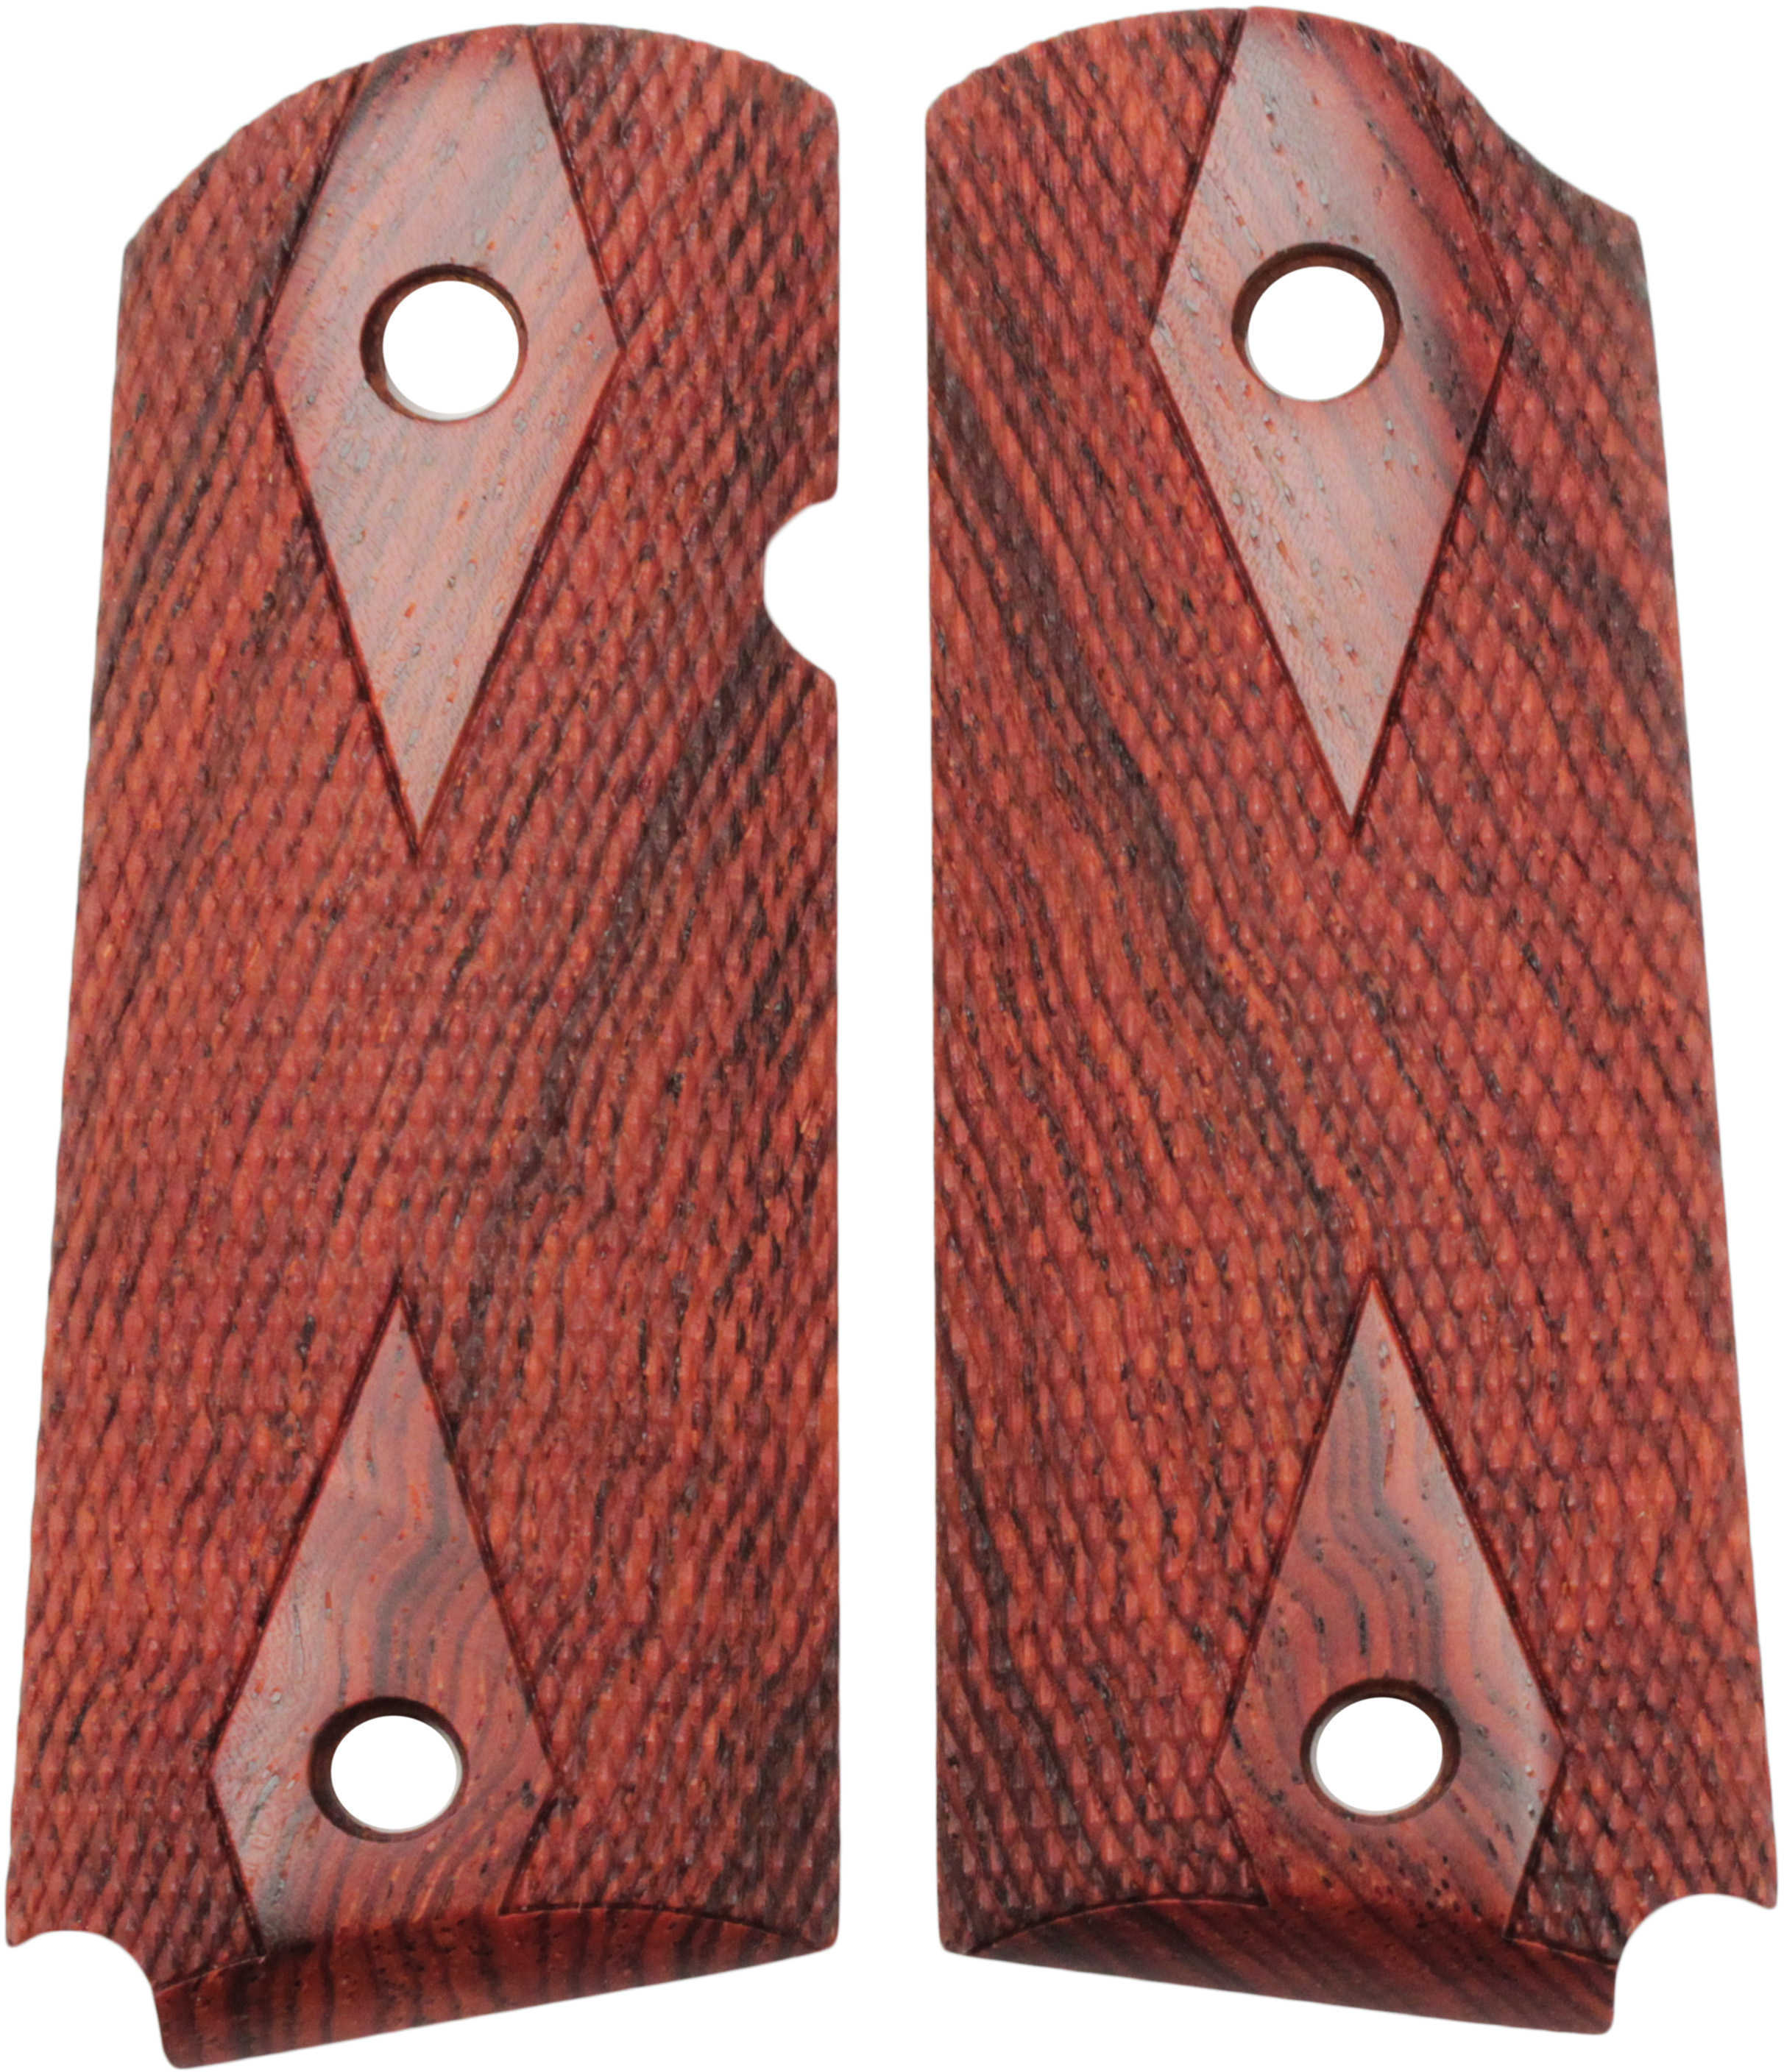 Hogue Grips Fits Colt Officer Checkered Coco Bolo Finish 43811